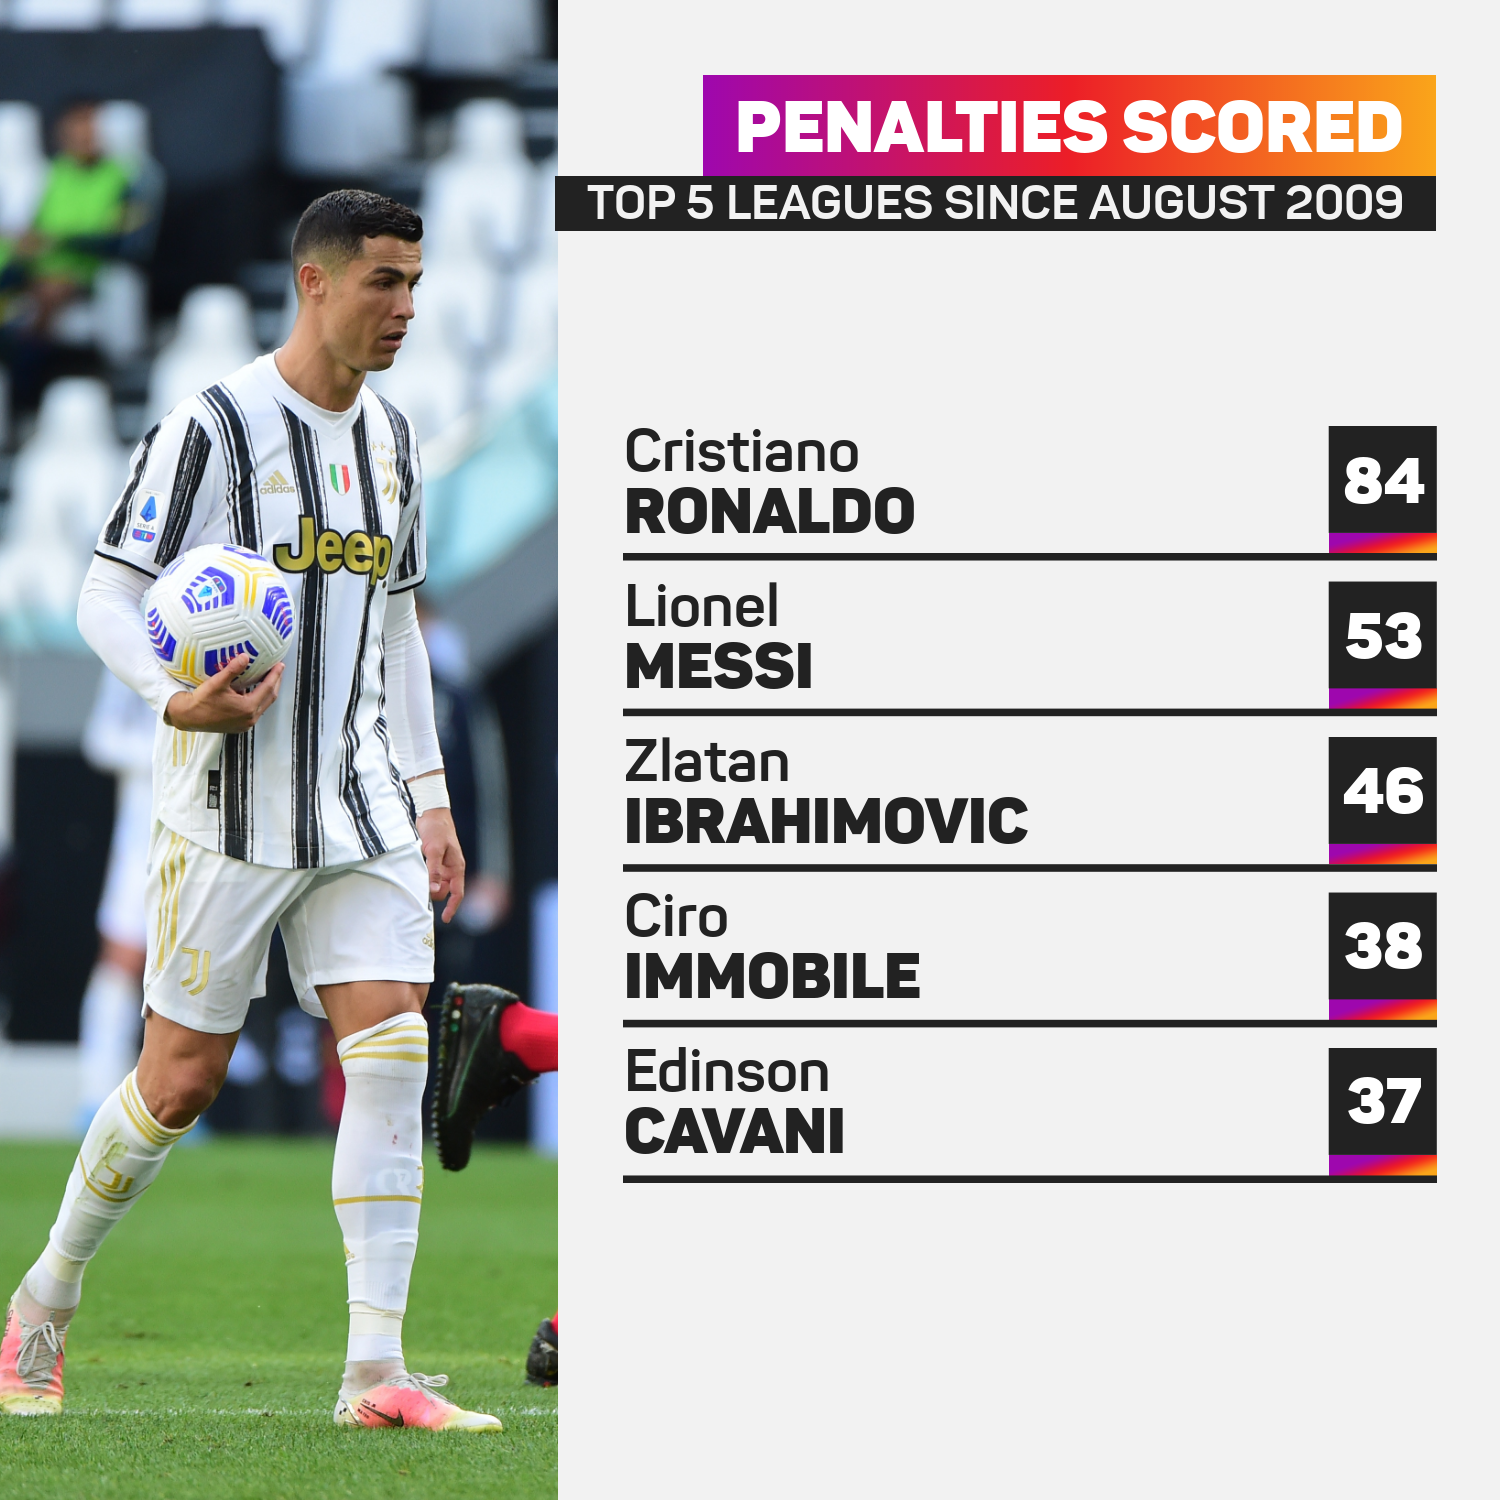 Cristiano Ronaldo has scored 31 more penalties since any other player in the top five leagues since he left Man Utd